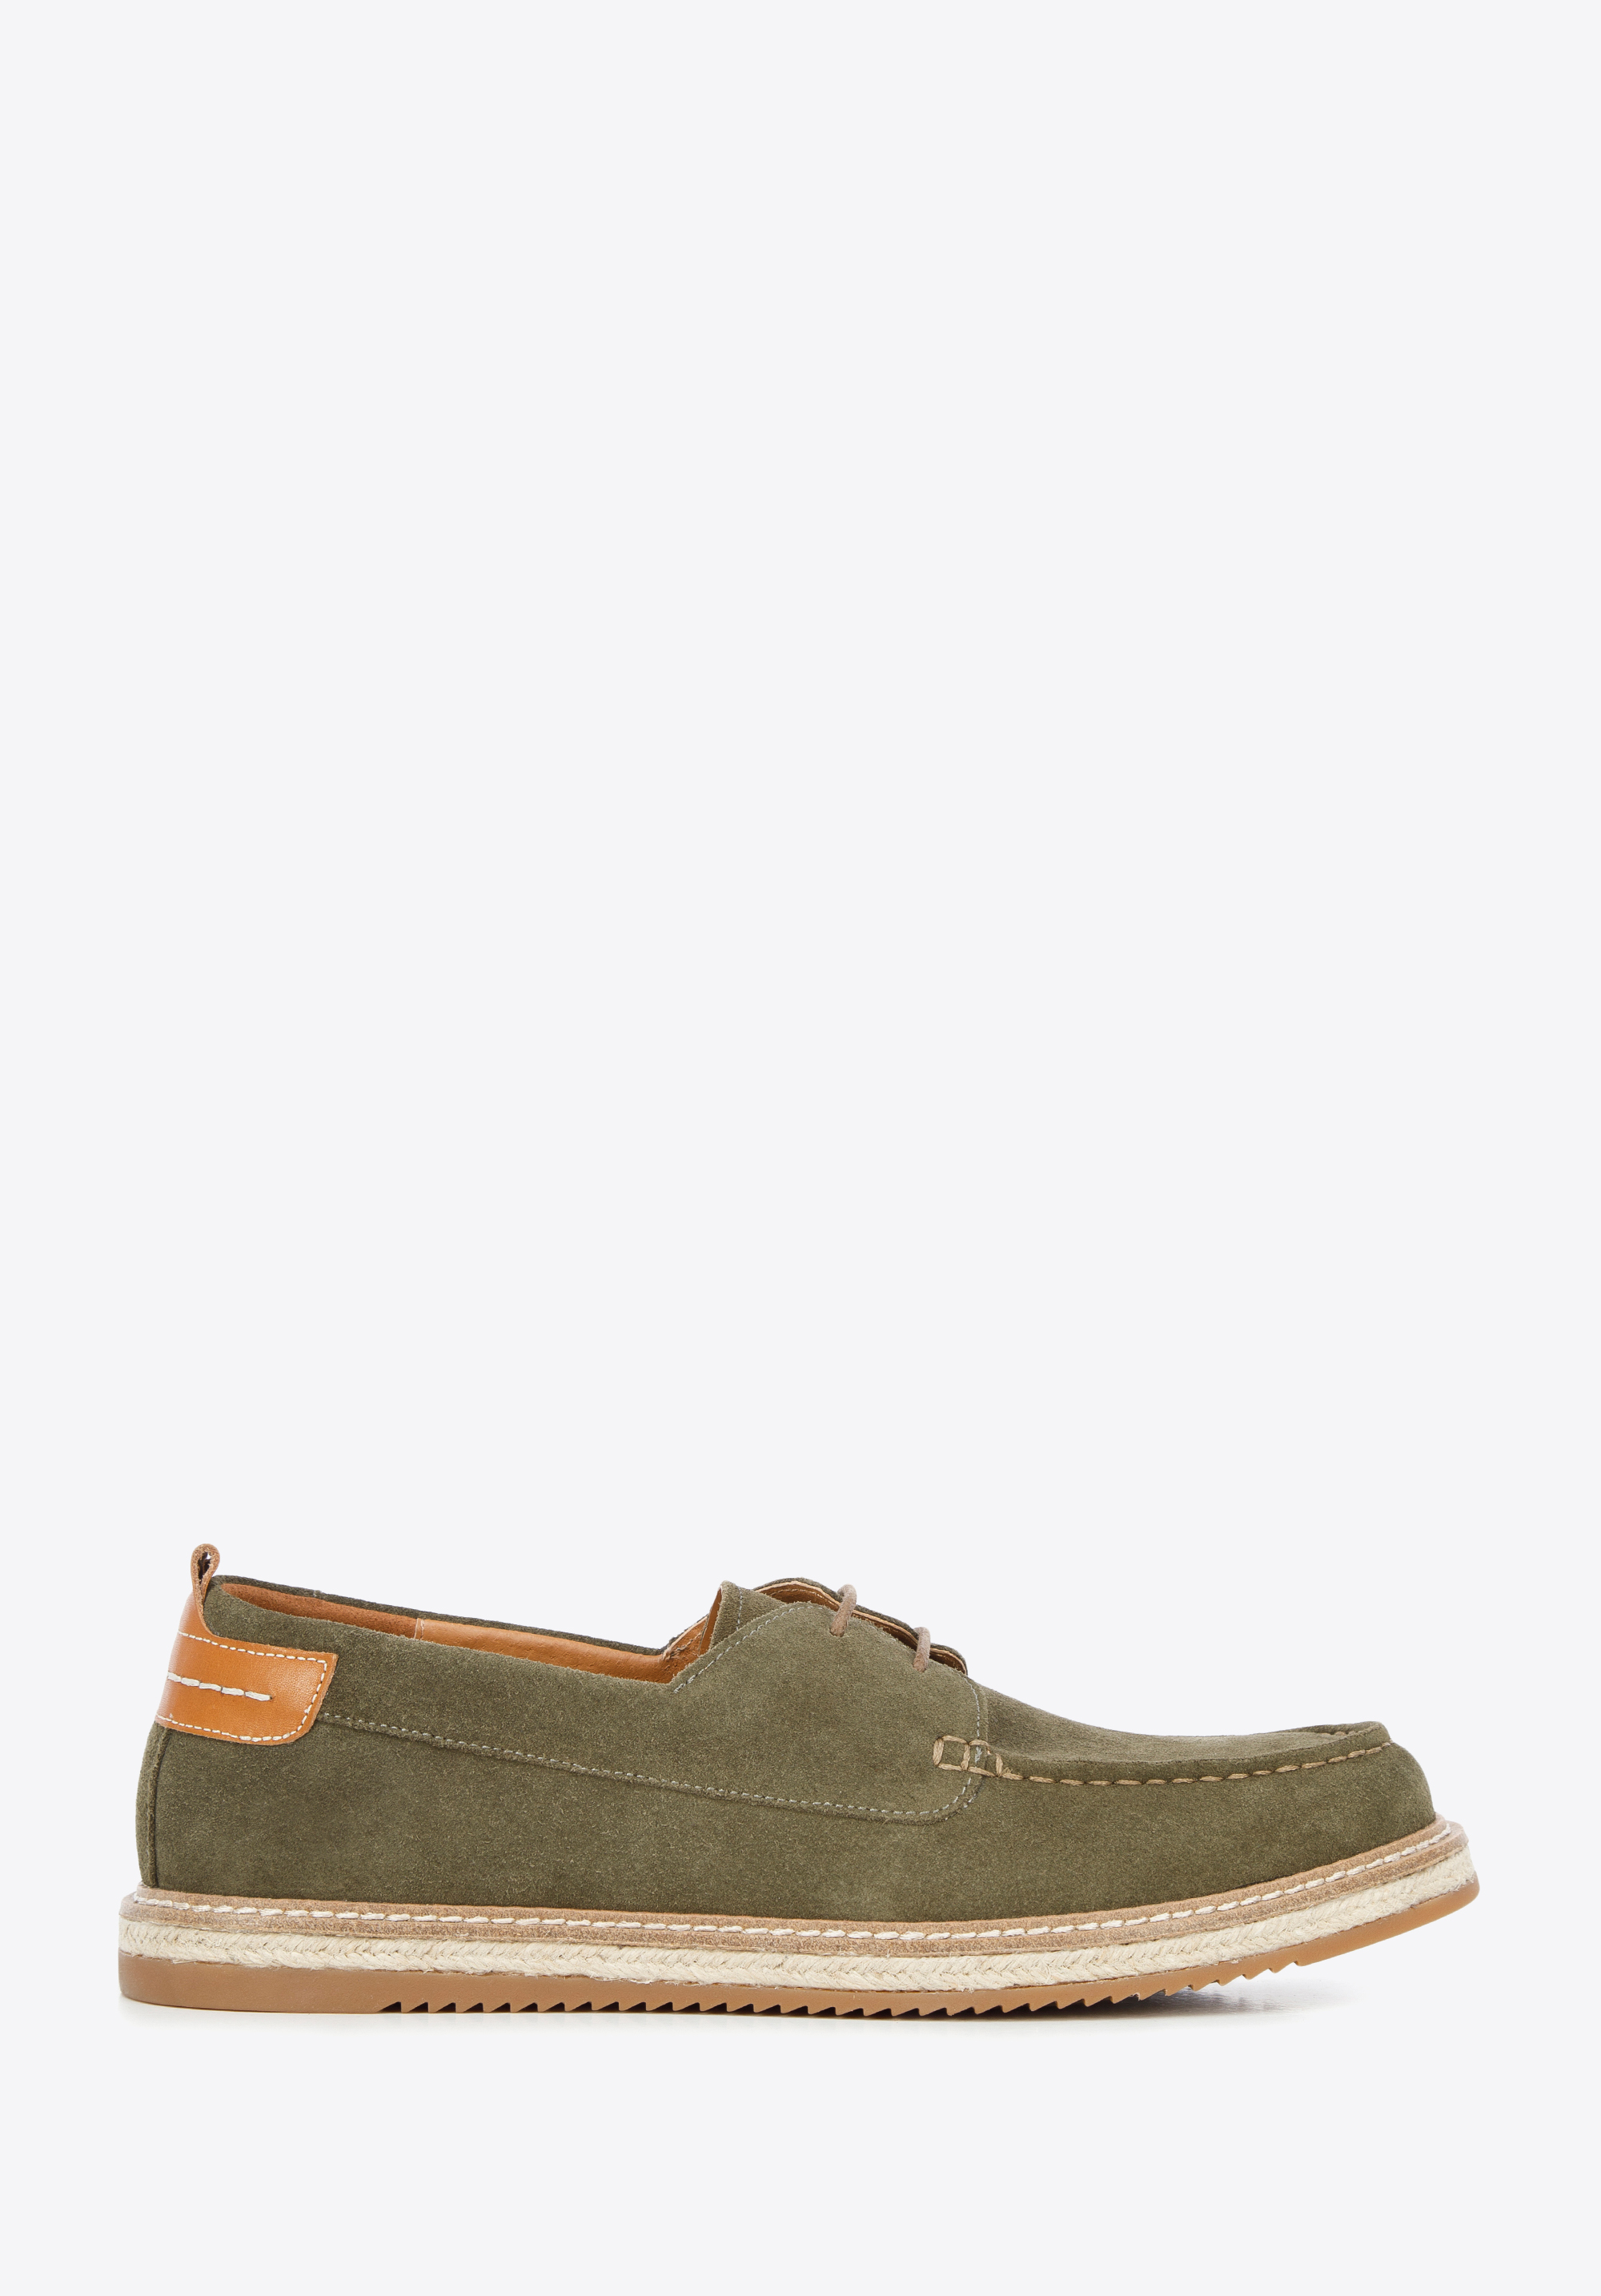 Men's suede shoes with rope effect sole I WITTCHEN